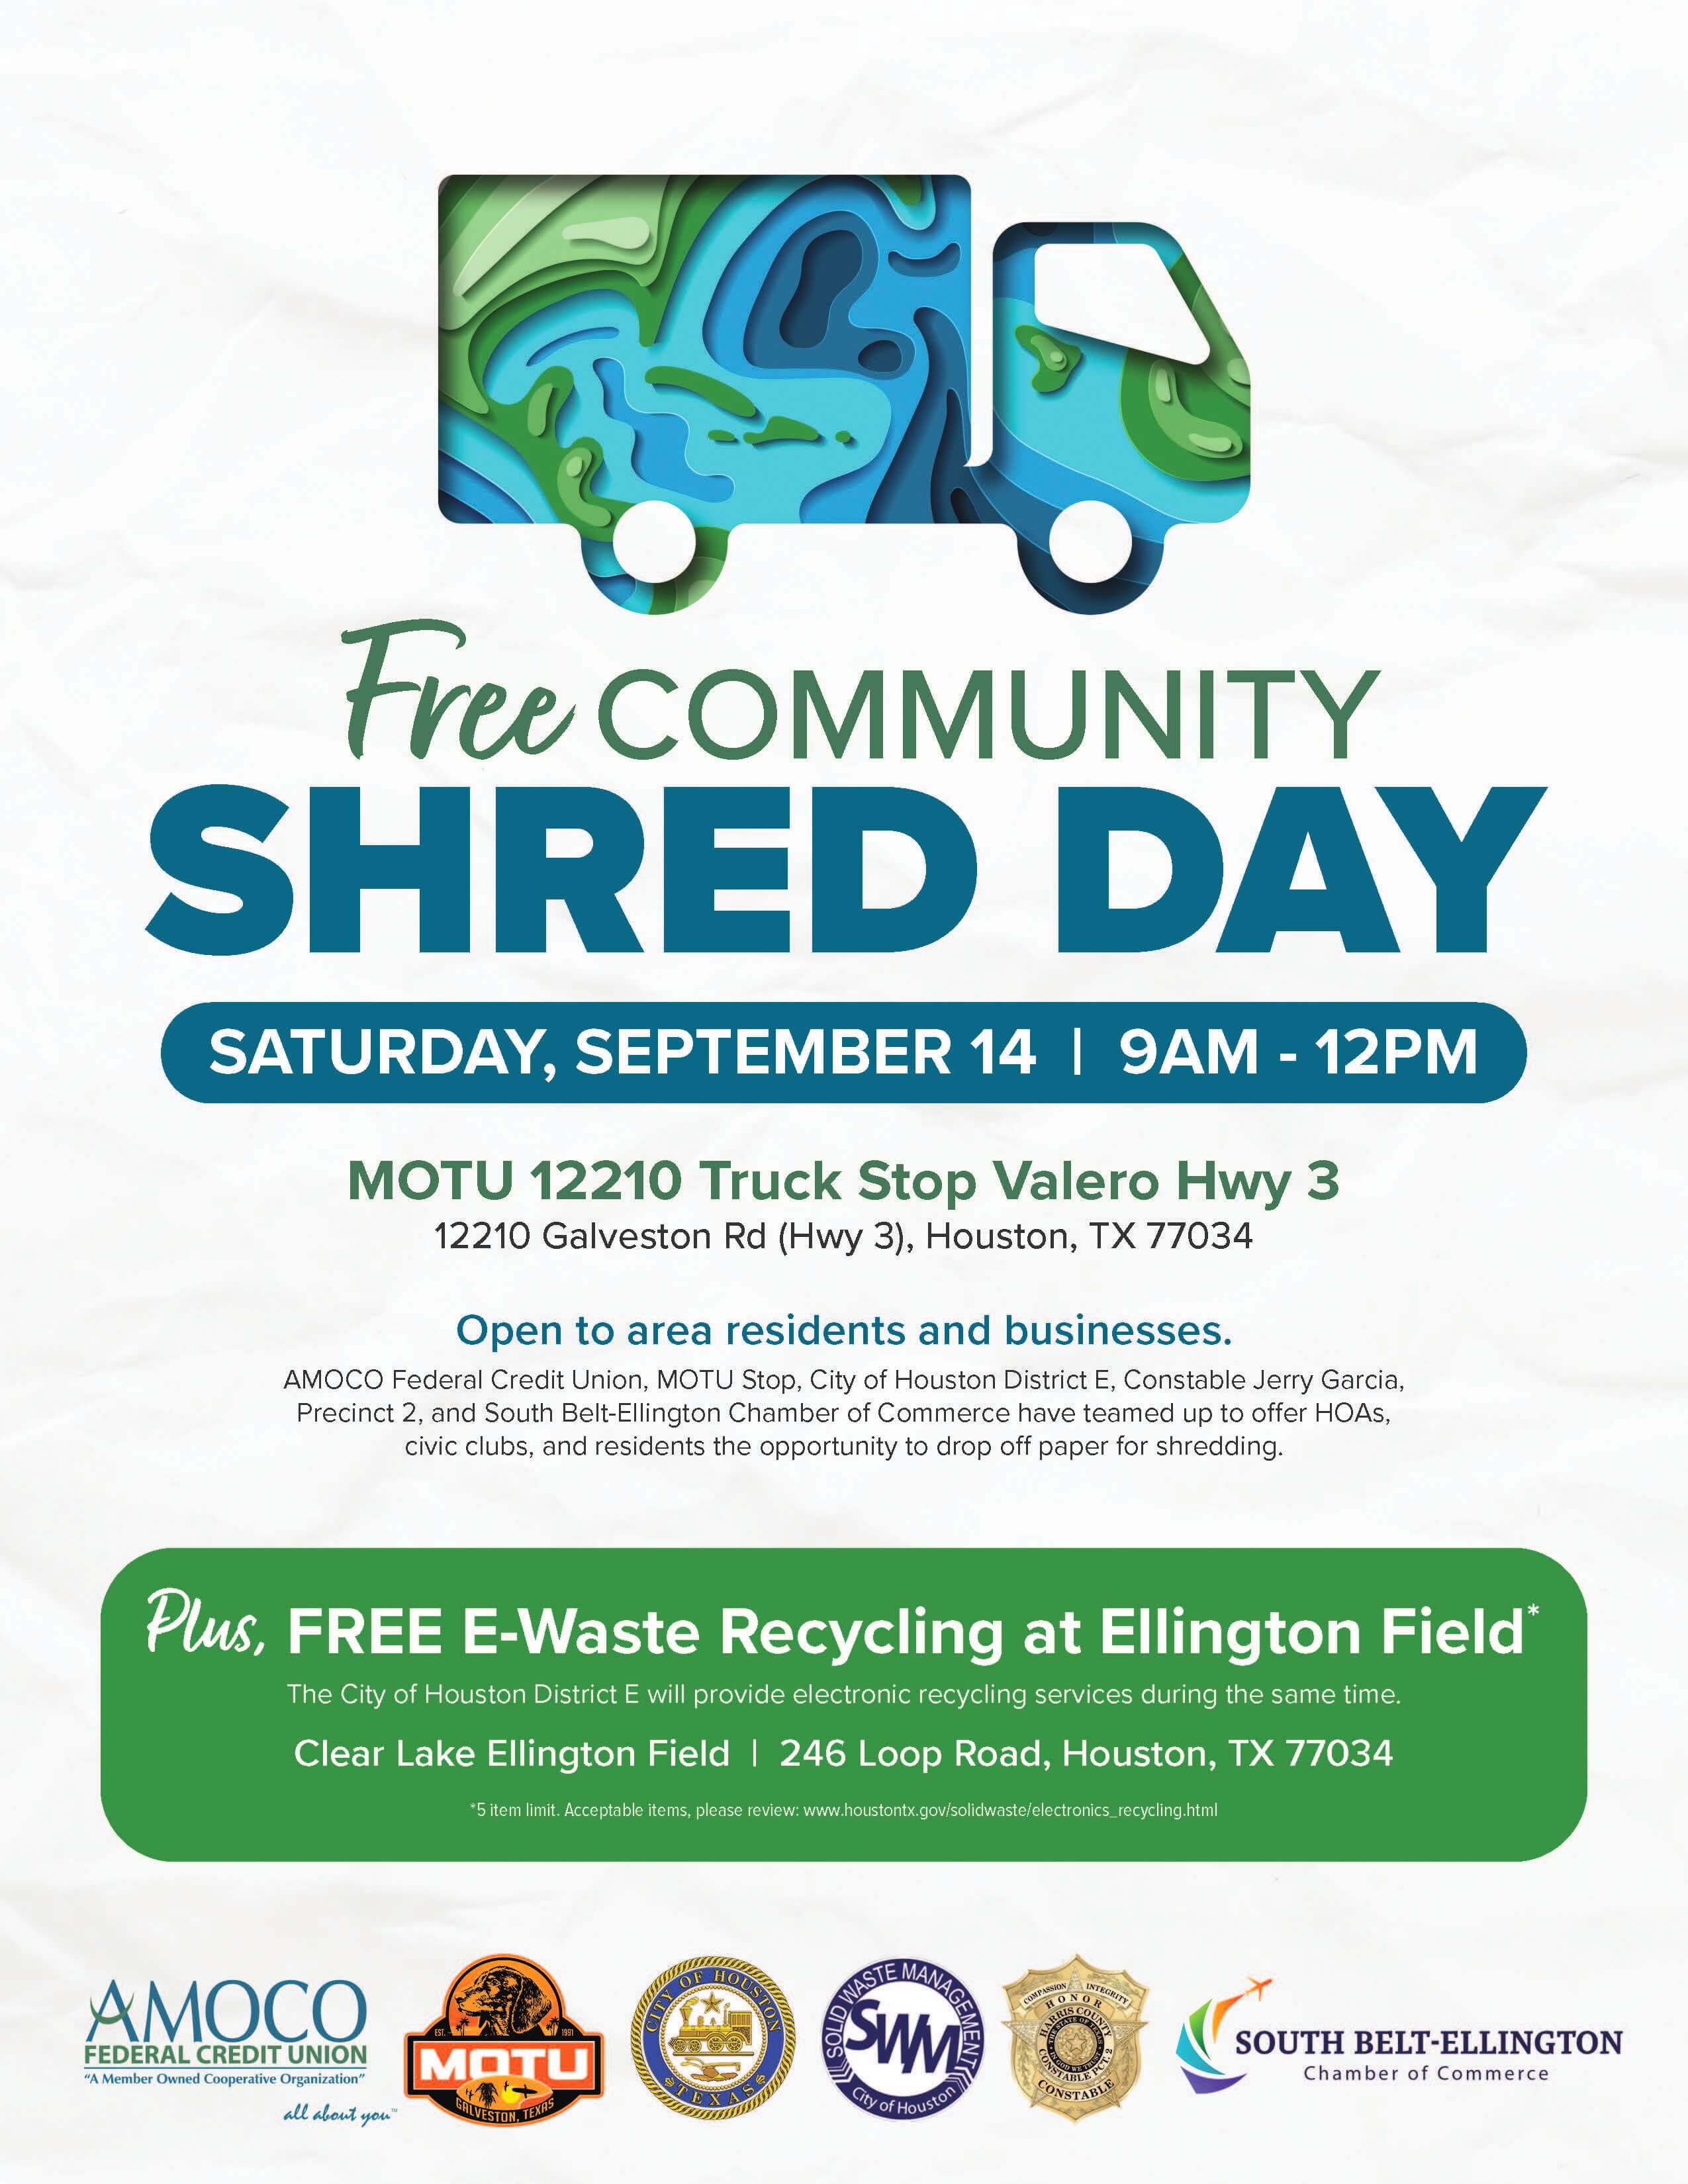 Private Shred Day Promotional Flyer